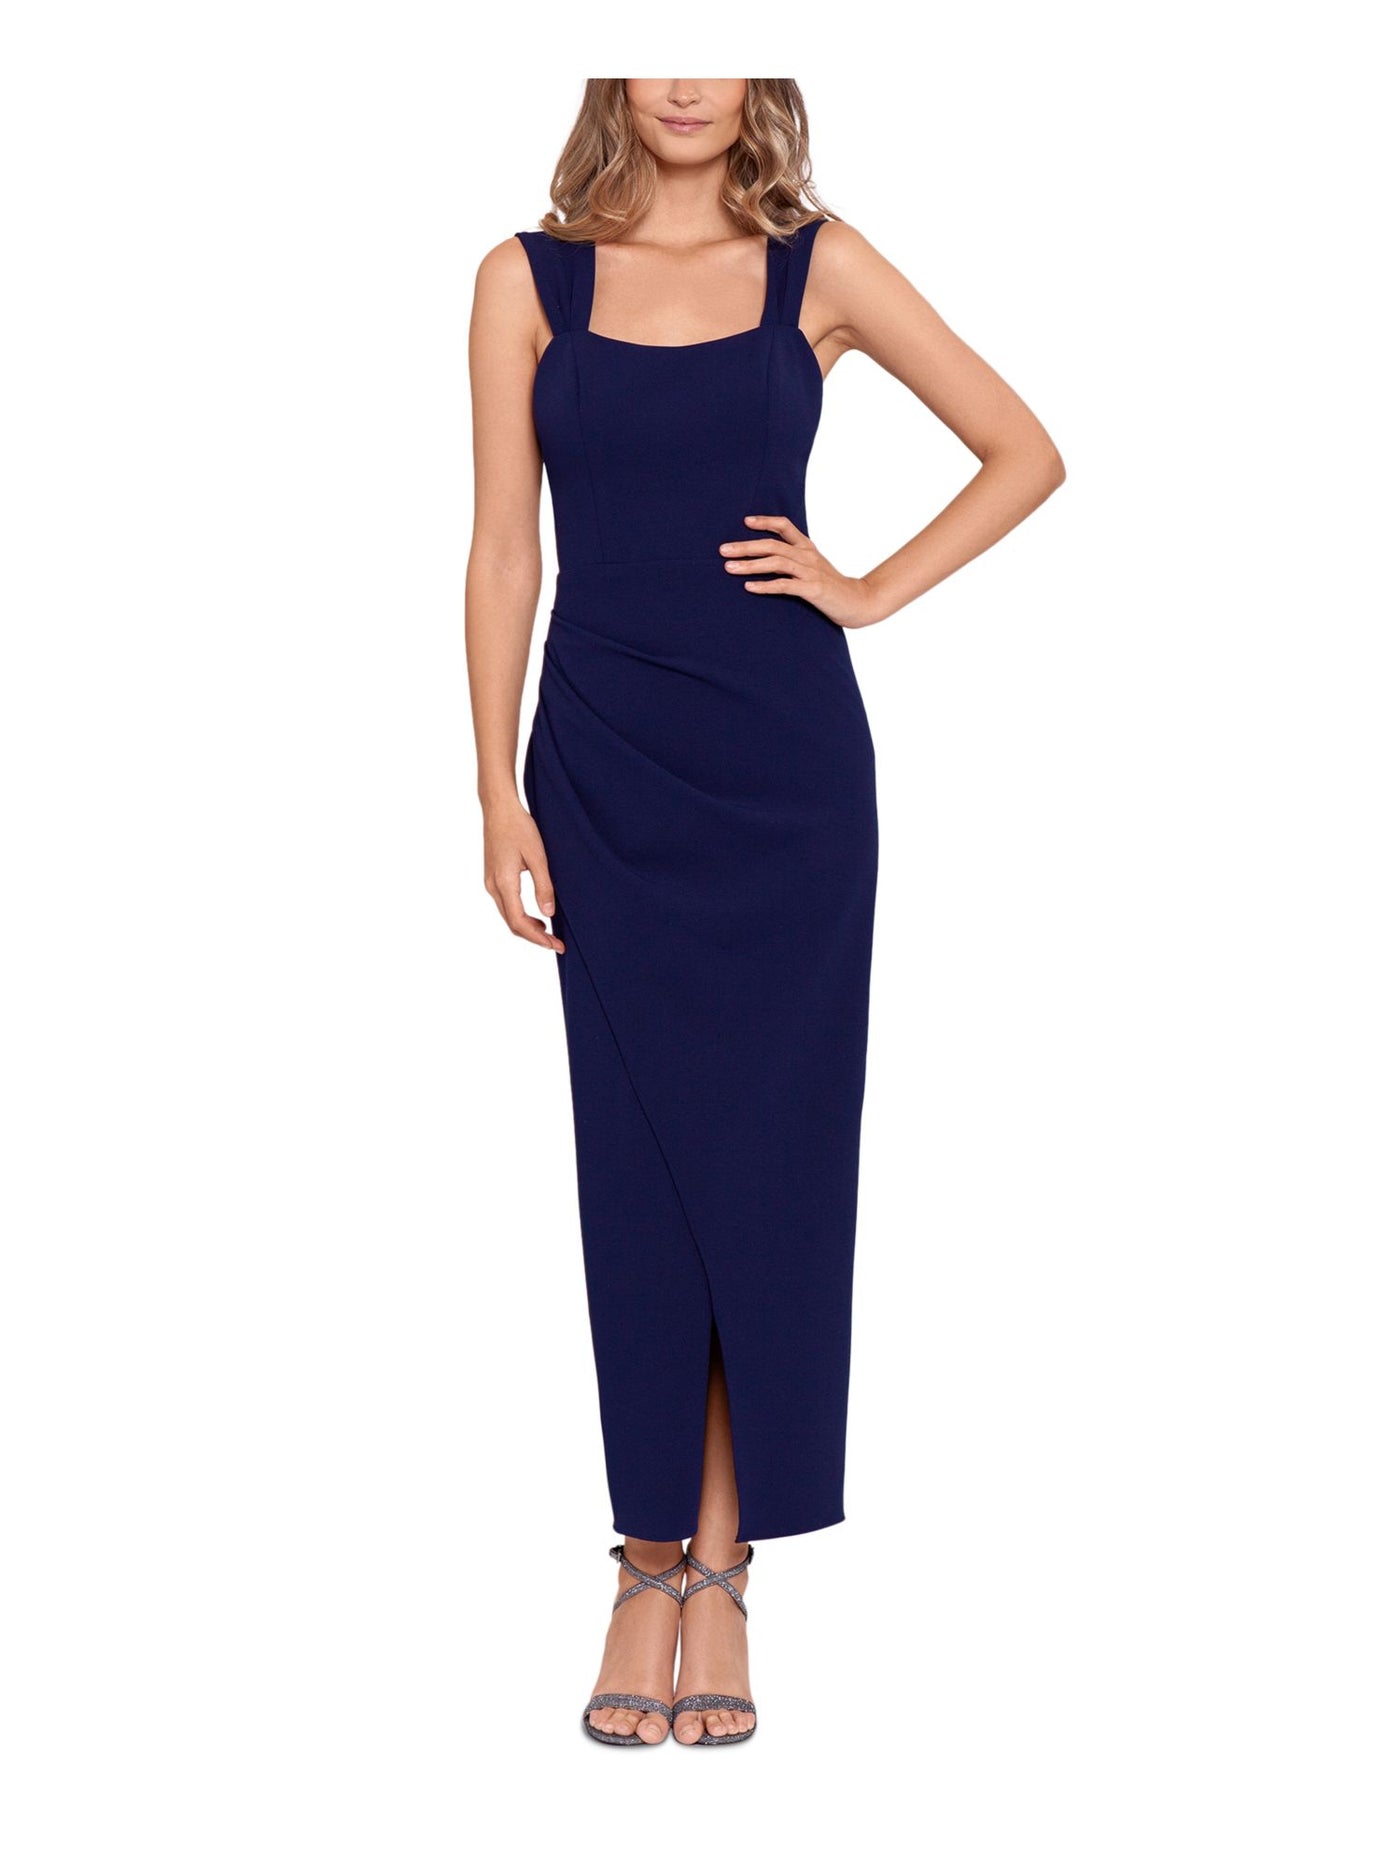 BETSY & ADAM Womens Navy Zippered Slitted Faux Tie Center Back Lined Sleeveless Square Neck Full-Length Evening Gown Dress 0